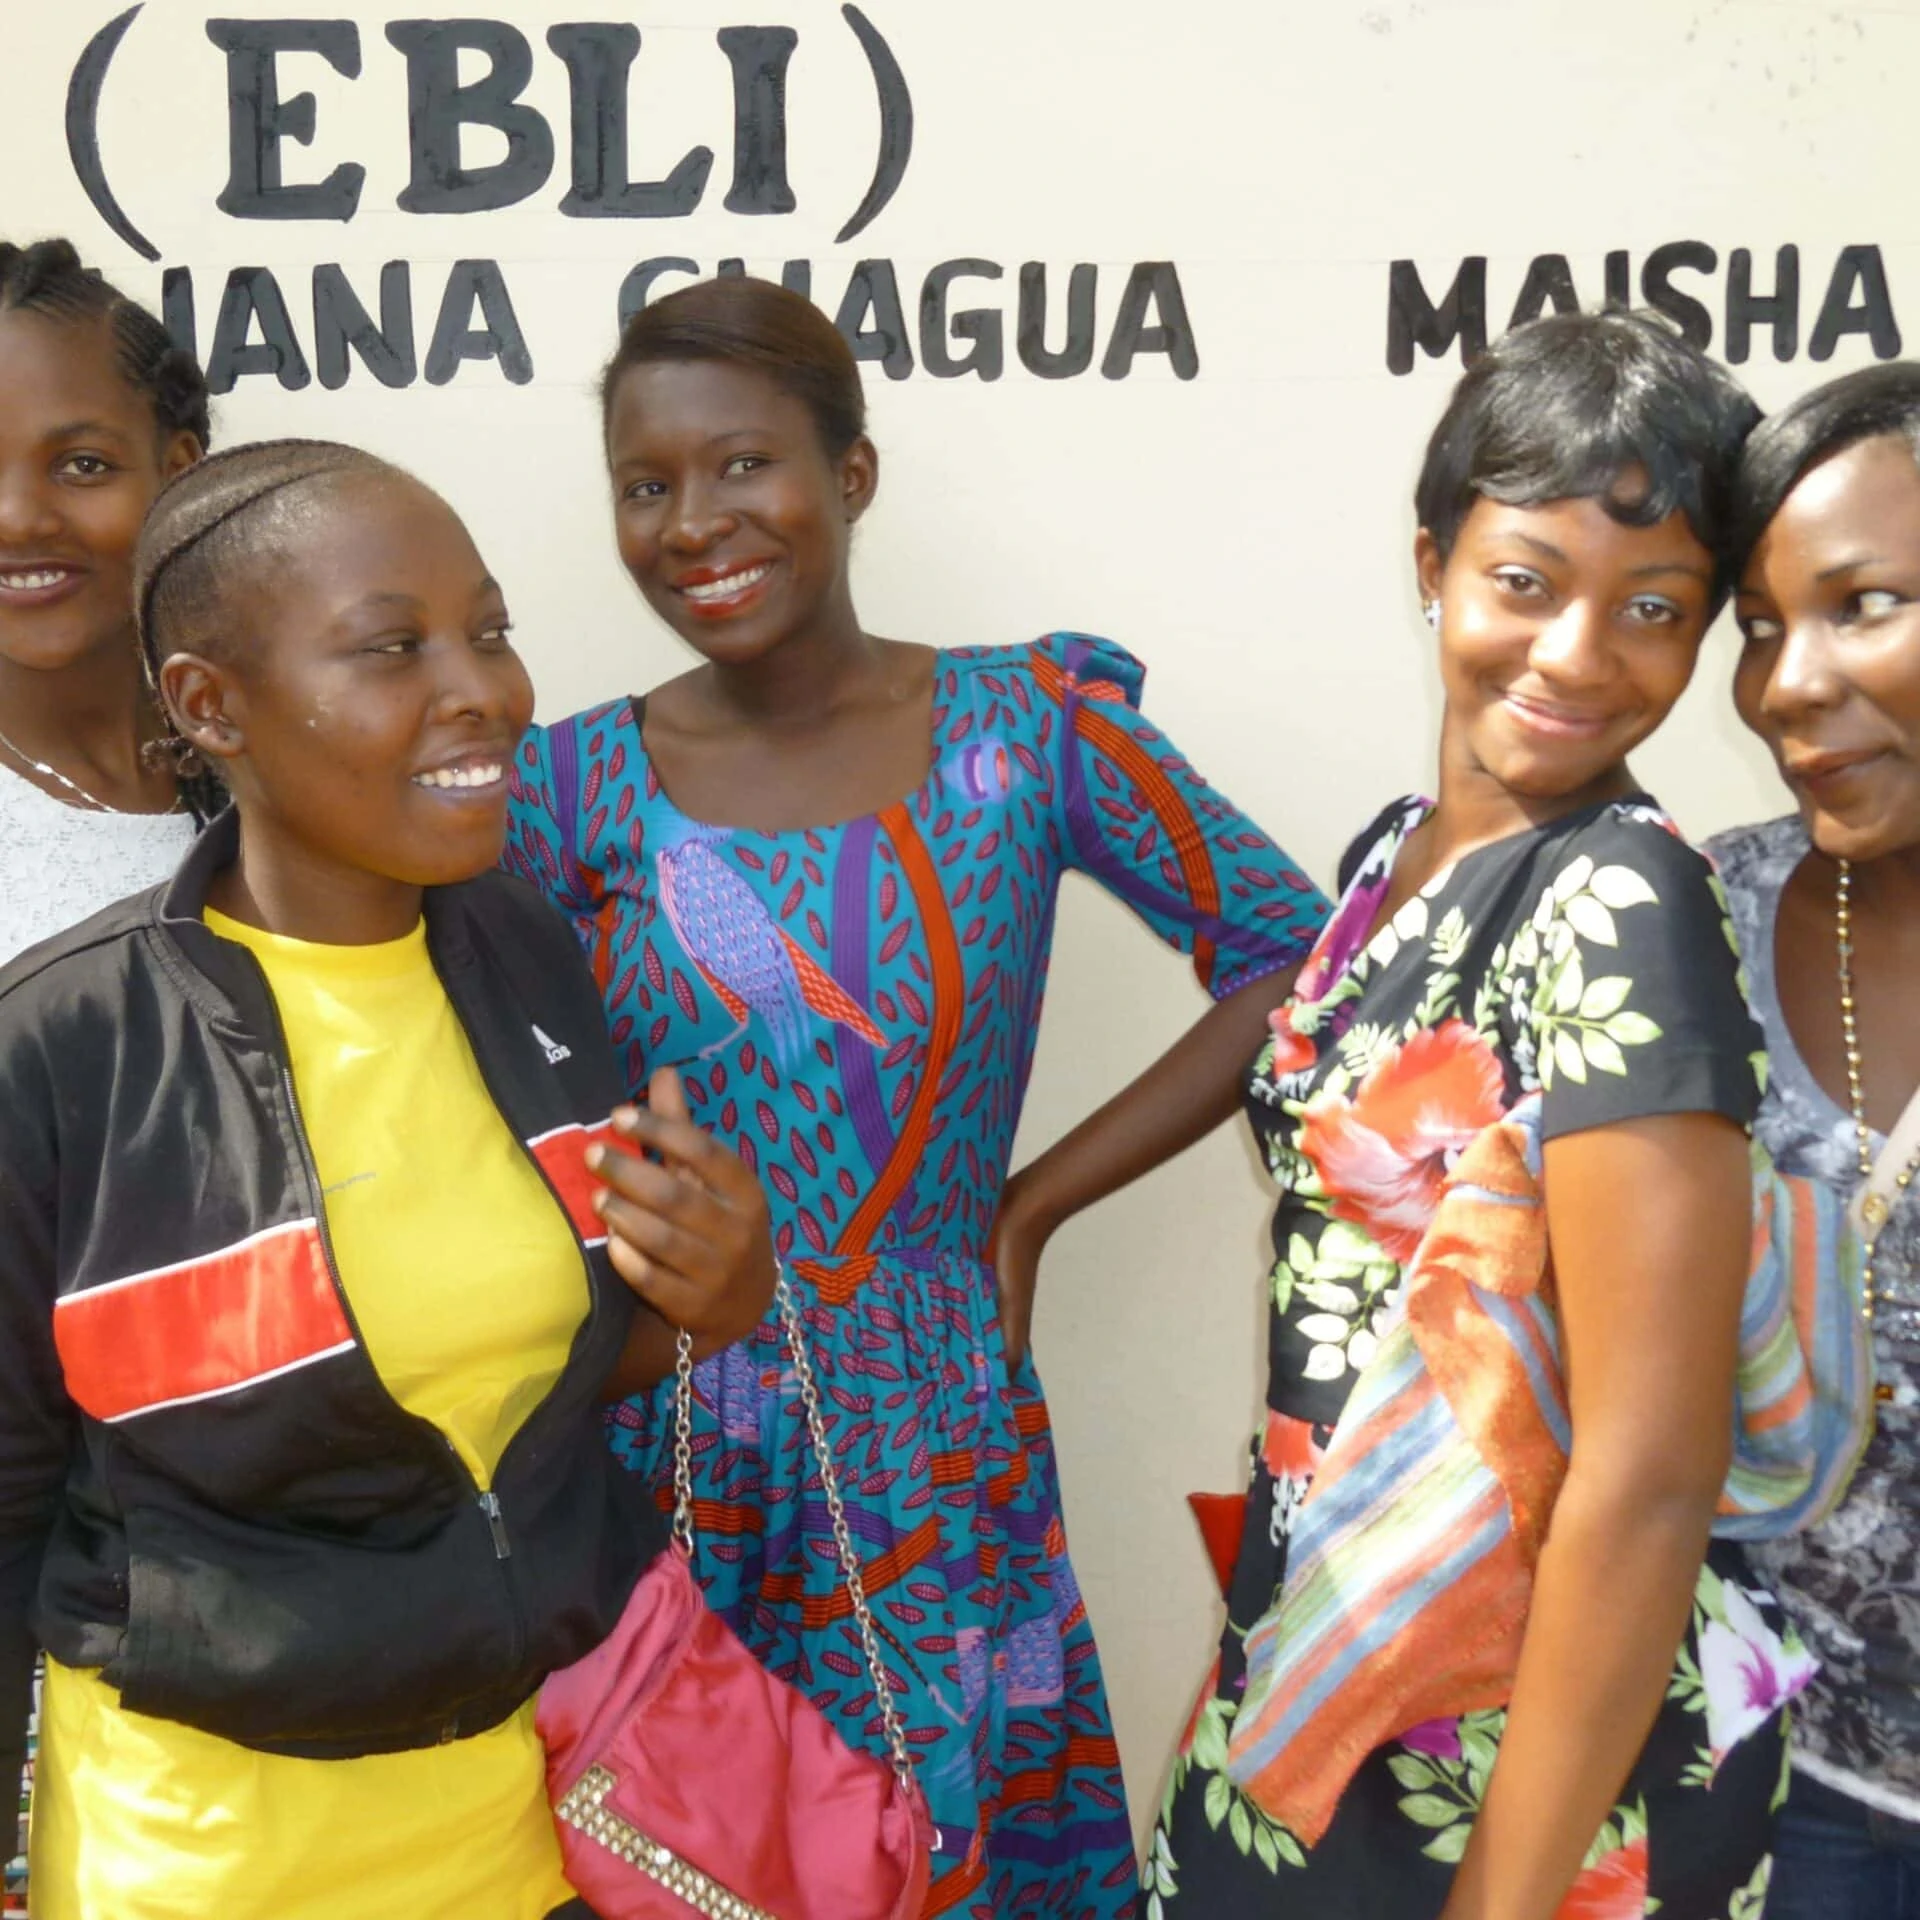 Group picture with five young women from Tanzania.